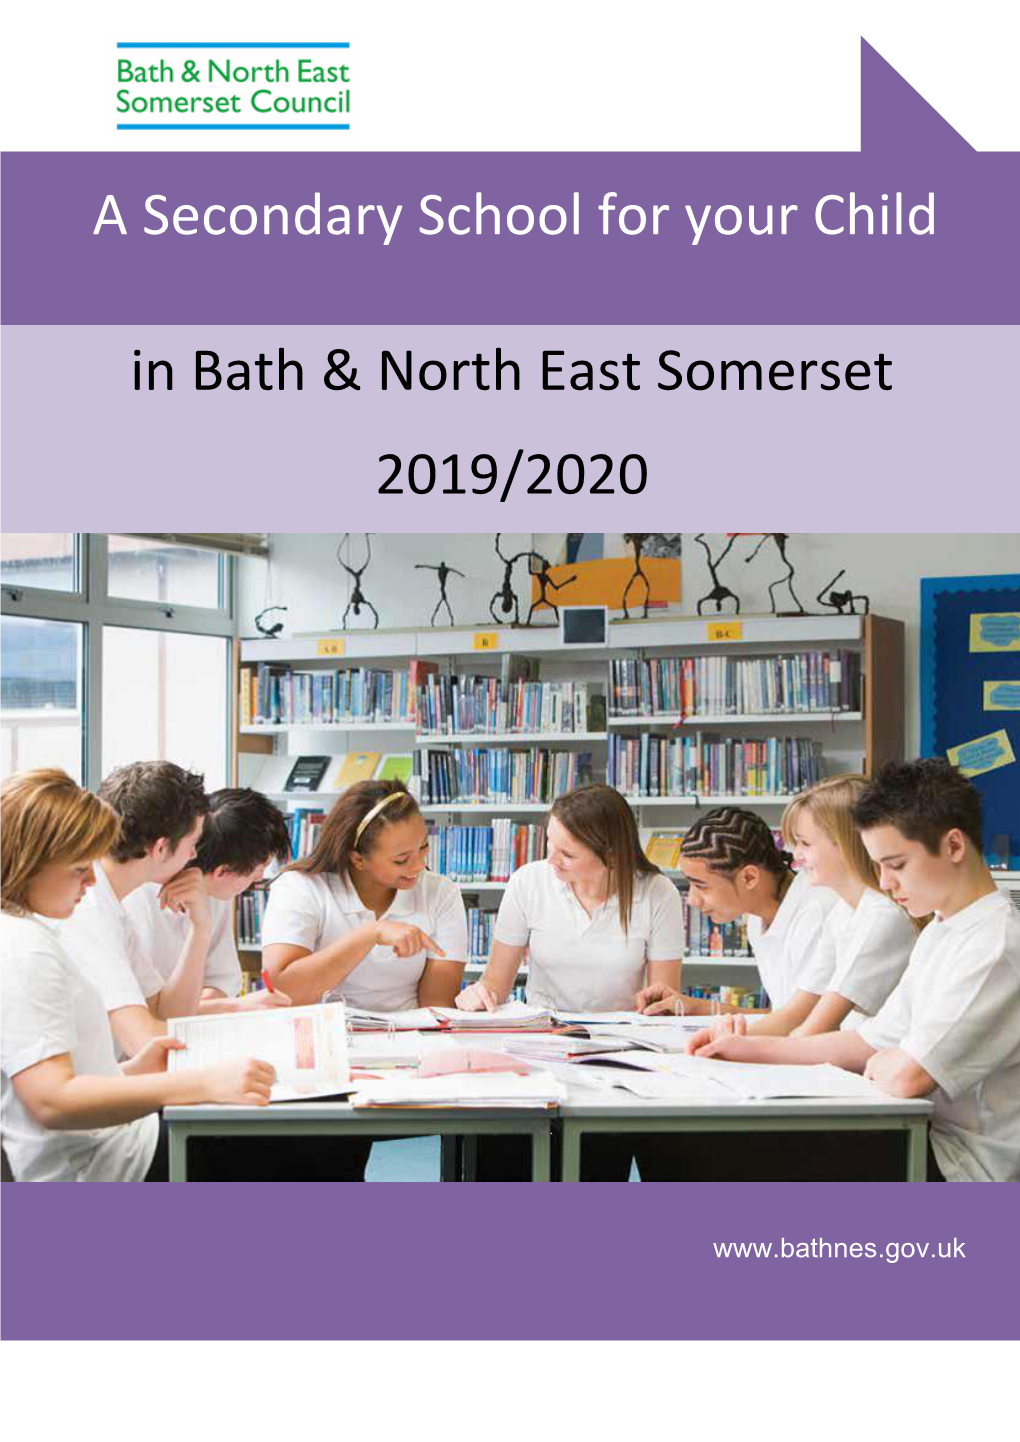 In Bath & North East Somerset 2019/2020 a Secondary School for Your Child